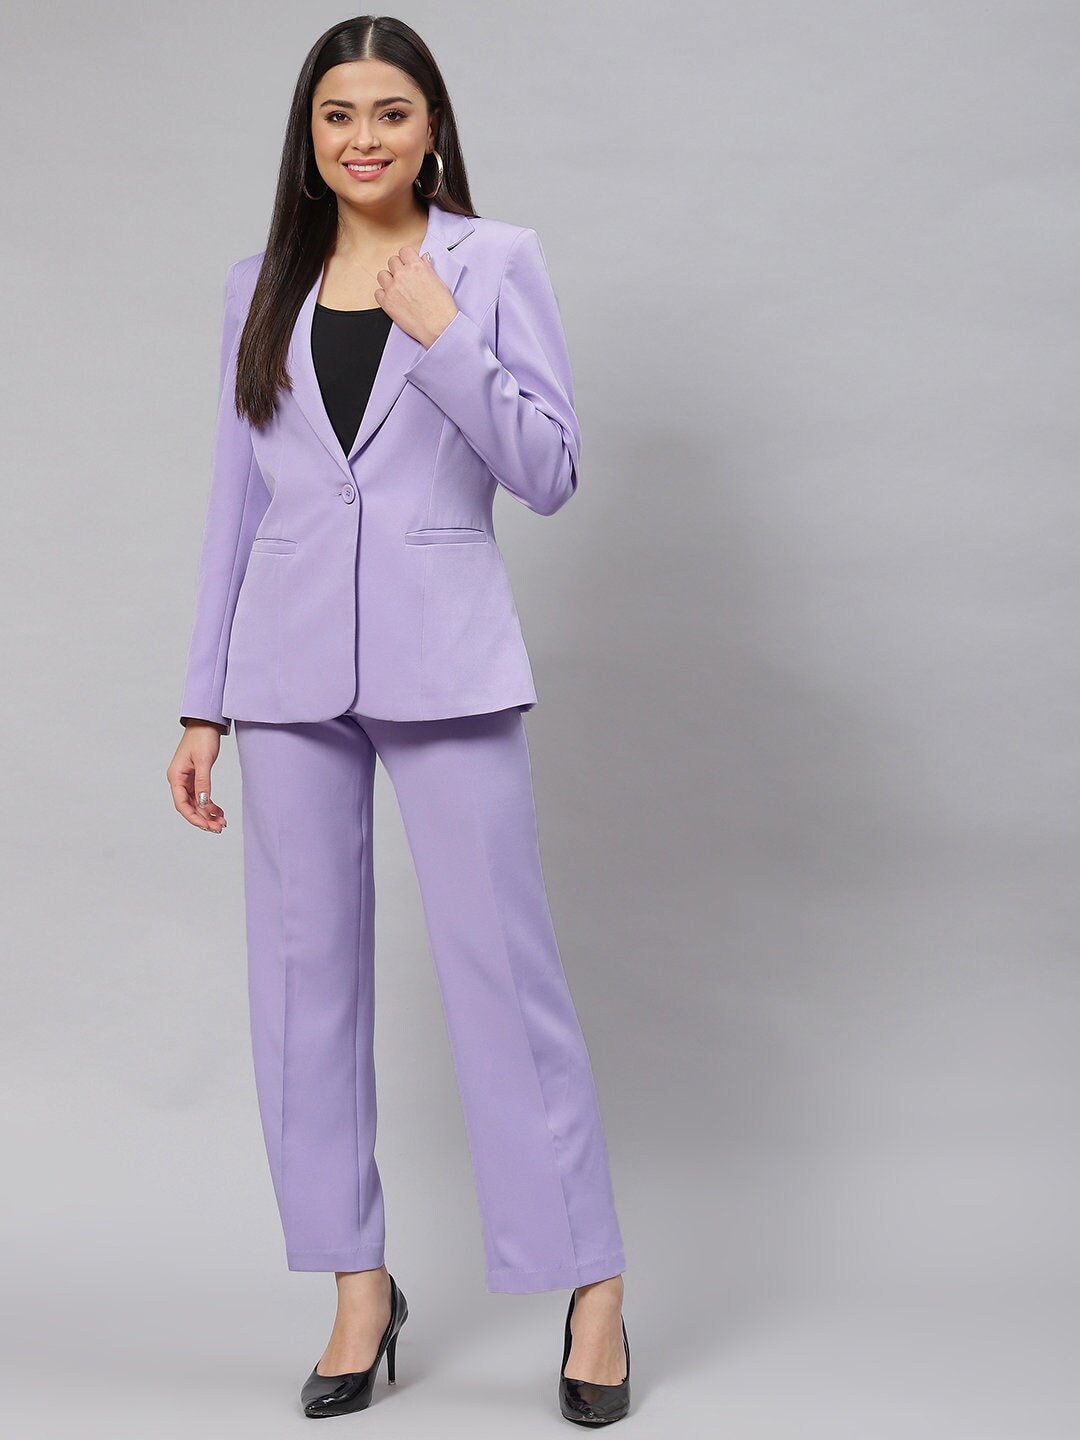 Buy Lavender Pant Suit Online In India -  India